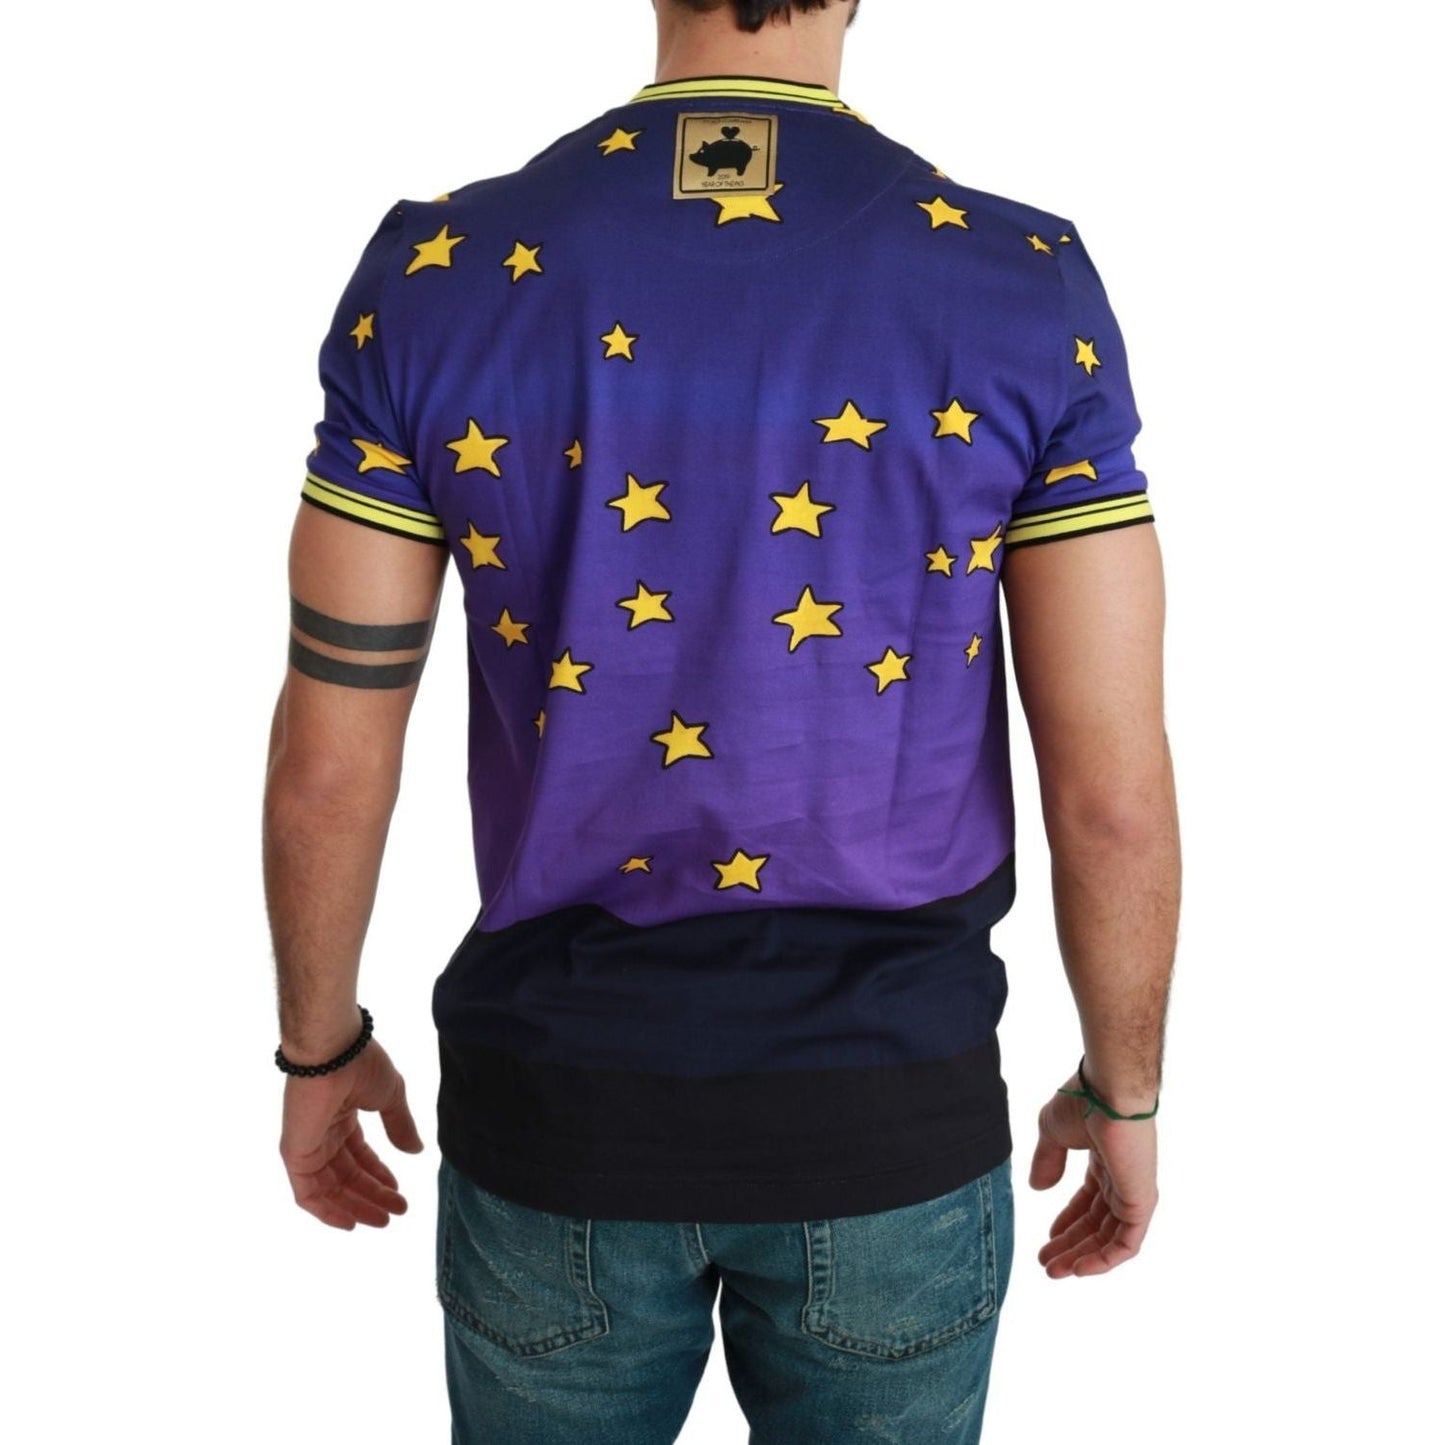 Dolce & Gabbana Purple Cotton Round Neck T-Shirt with Pig Motif purple-cotton-top-2019-year-of-the-pig-t-shirt